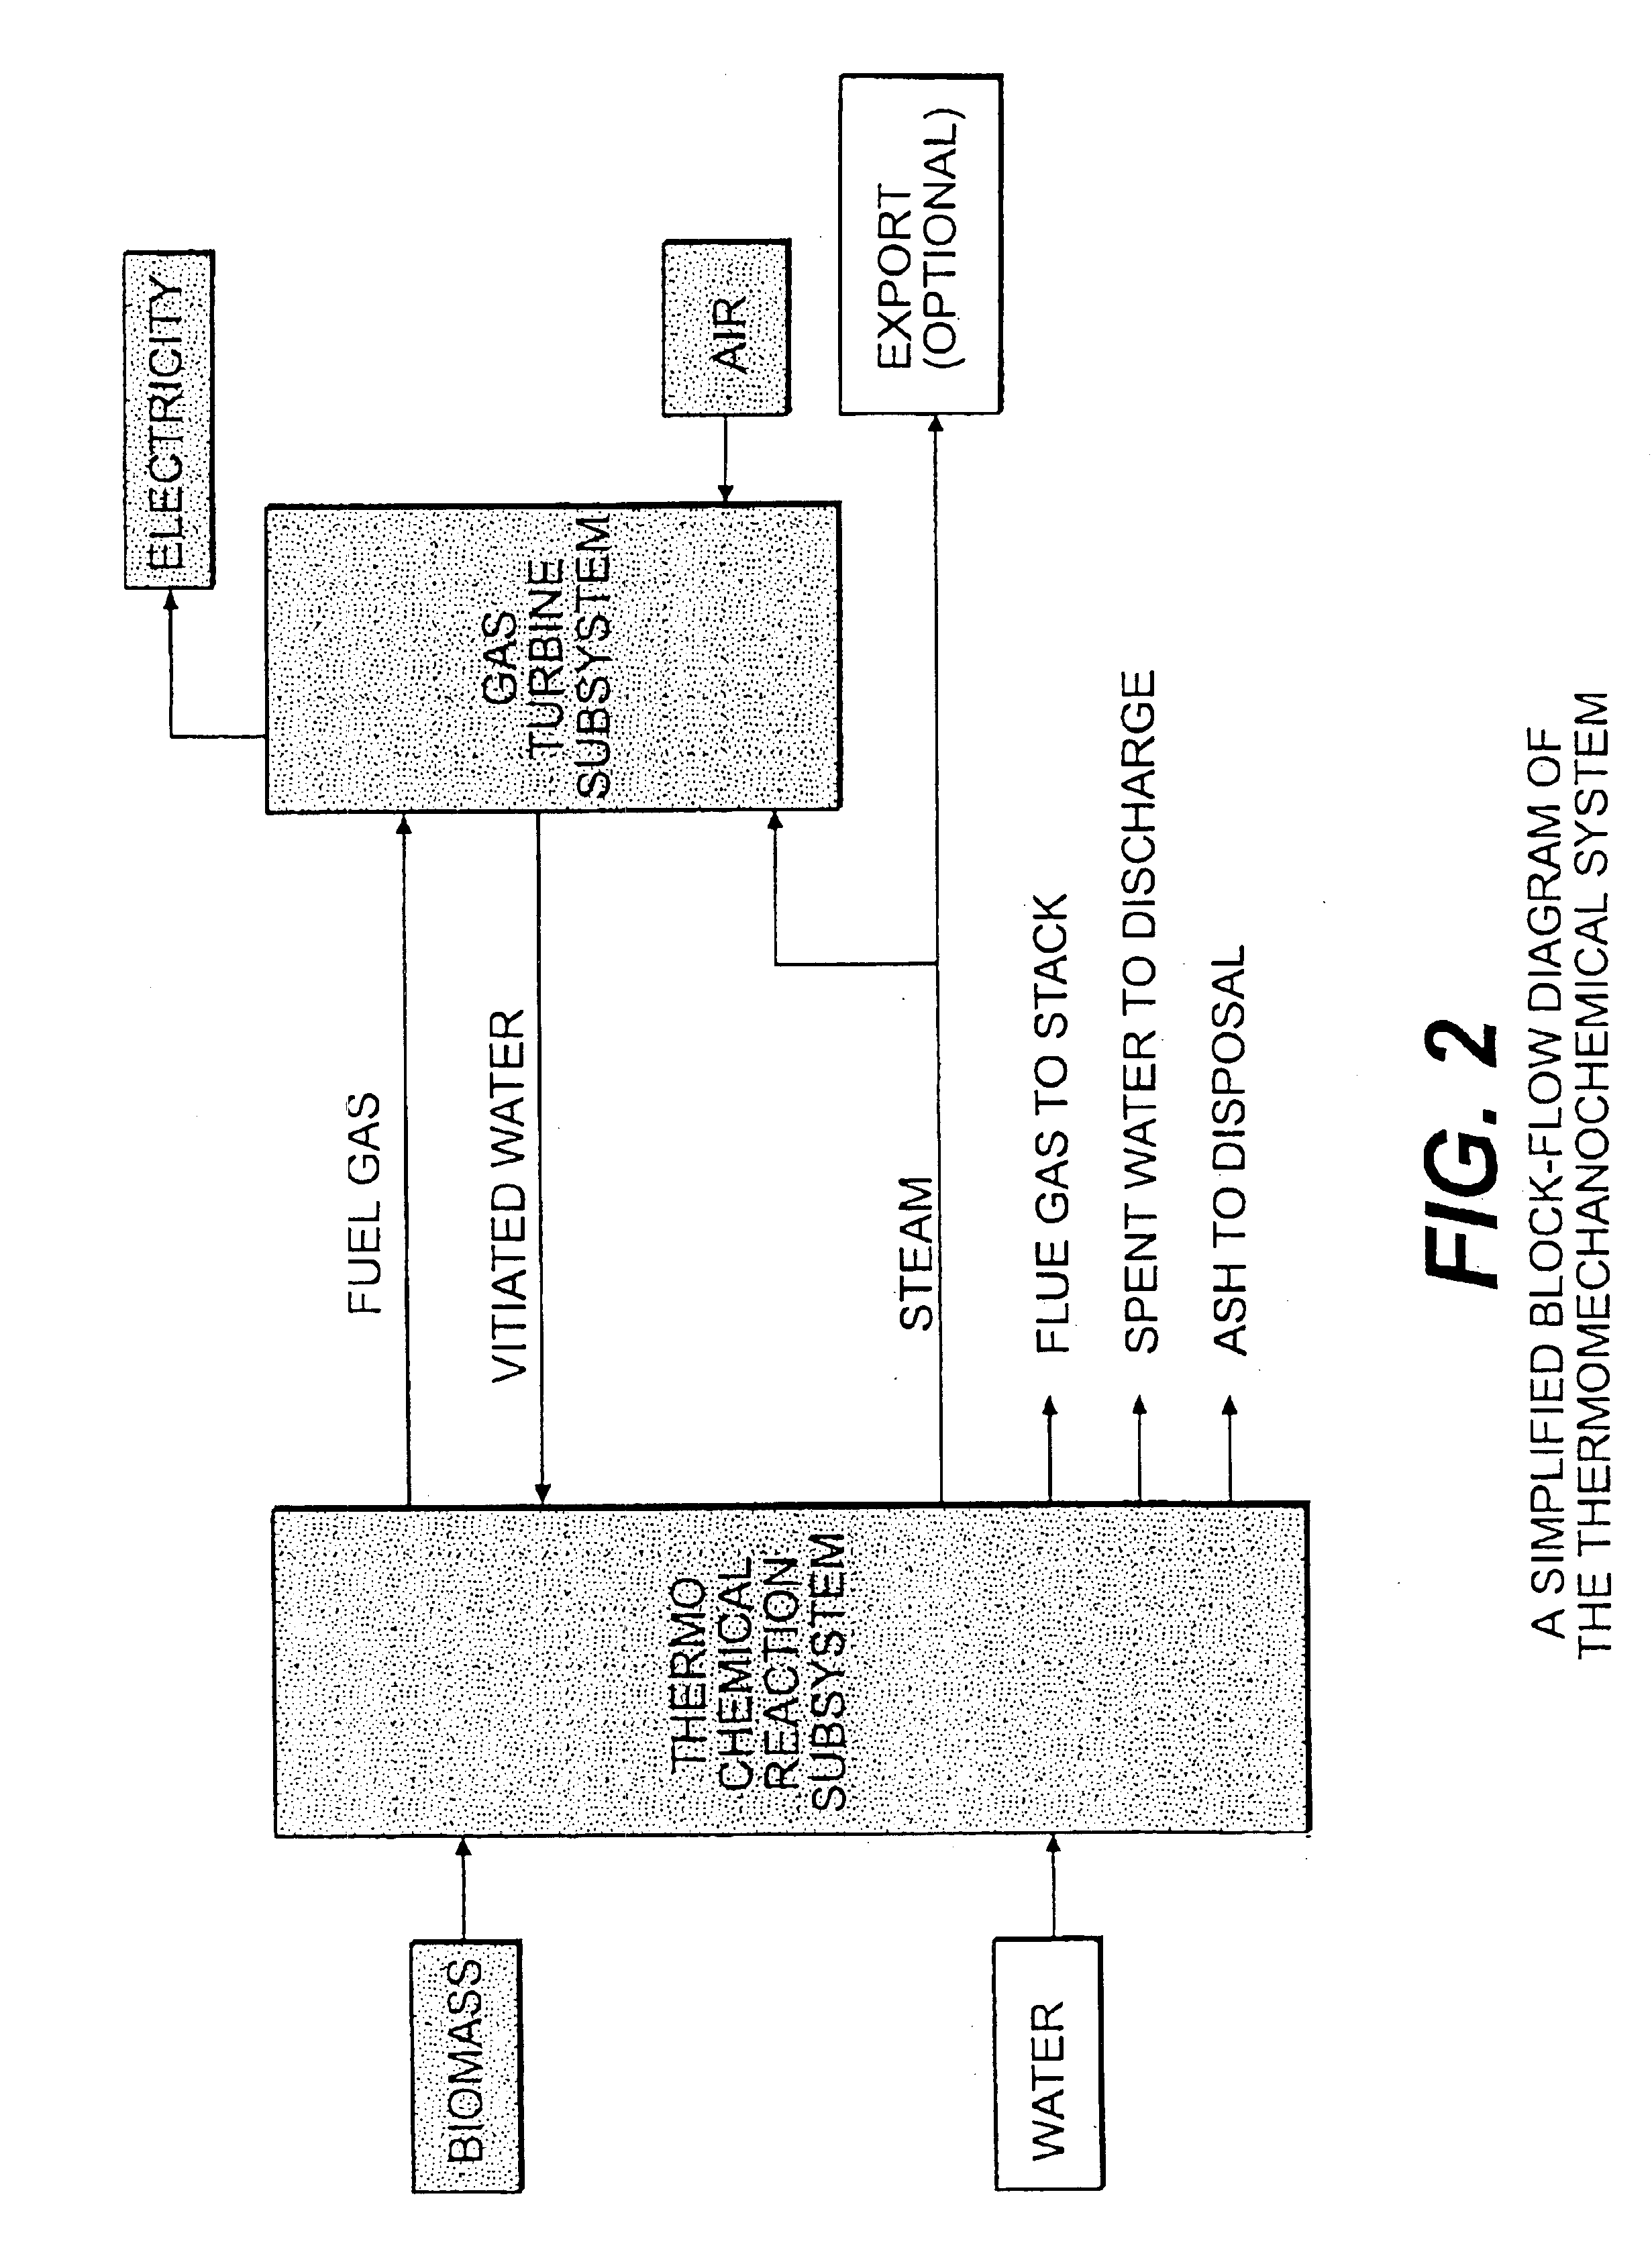 System integration of a steam reformer and gas turbine